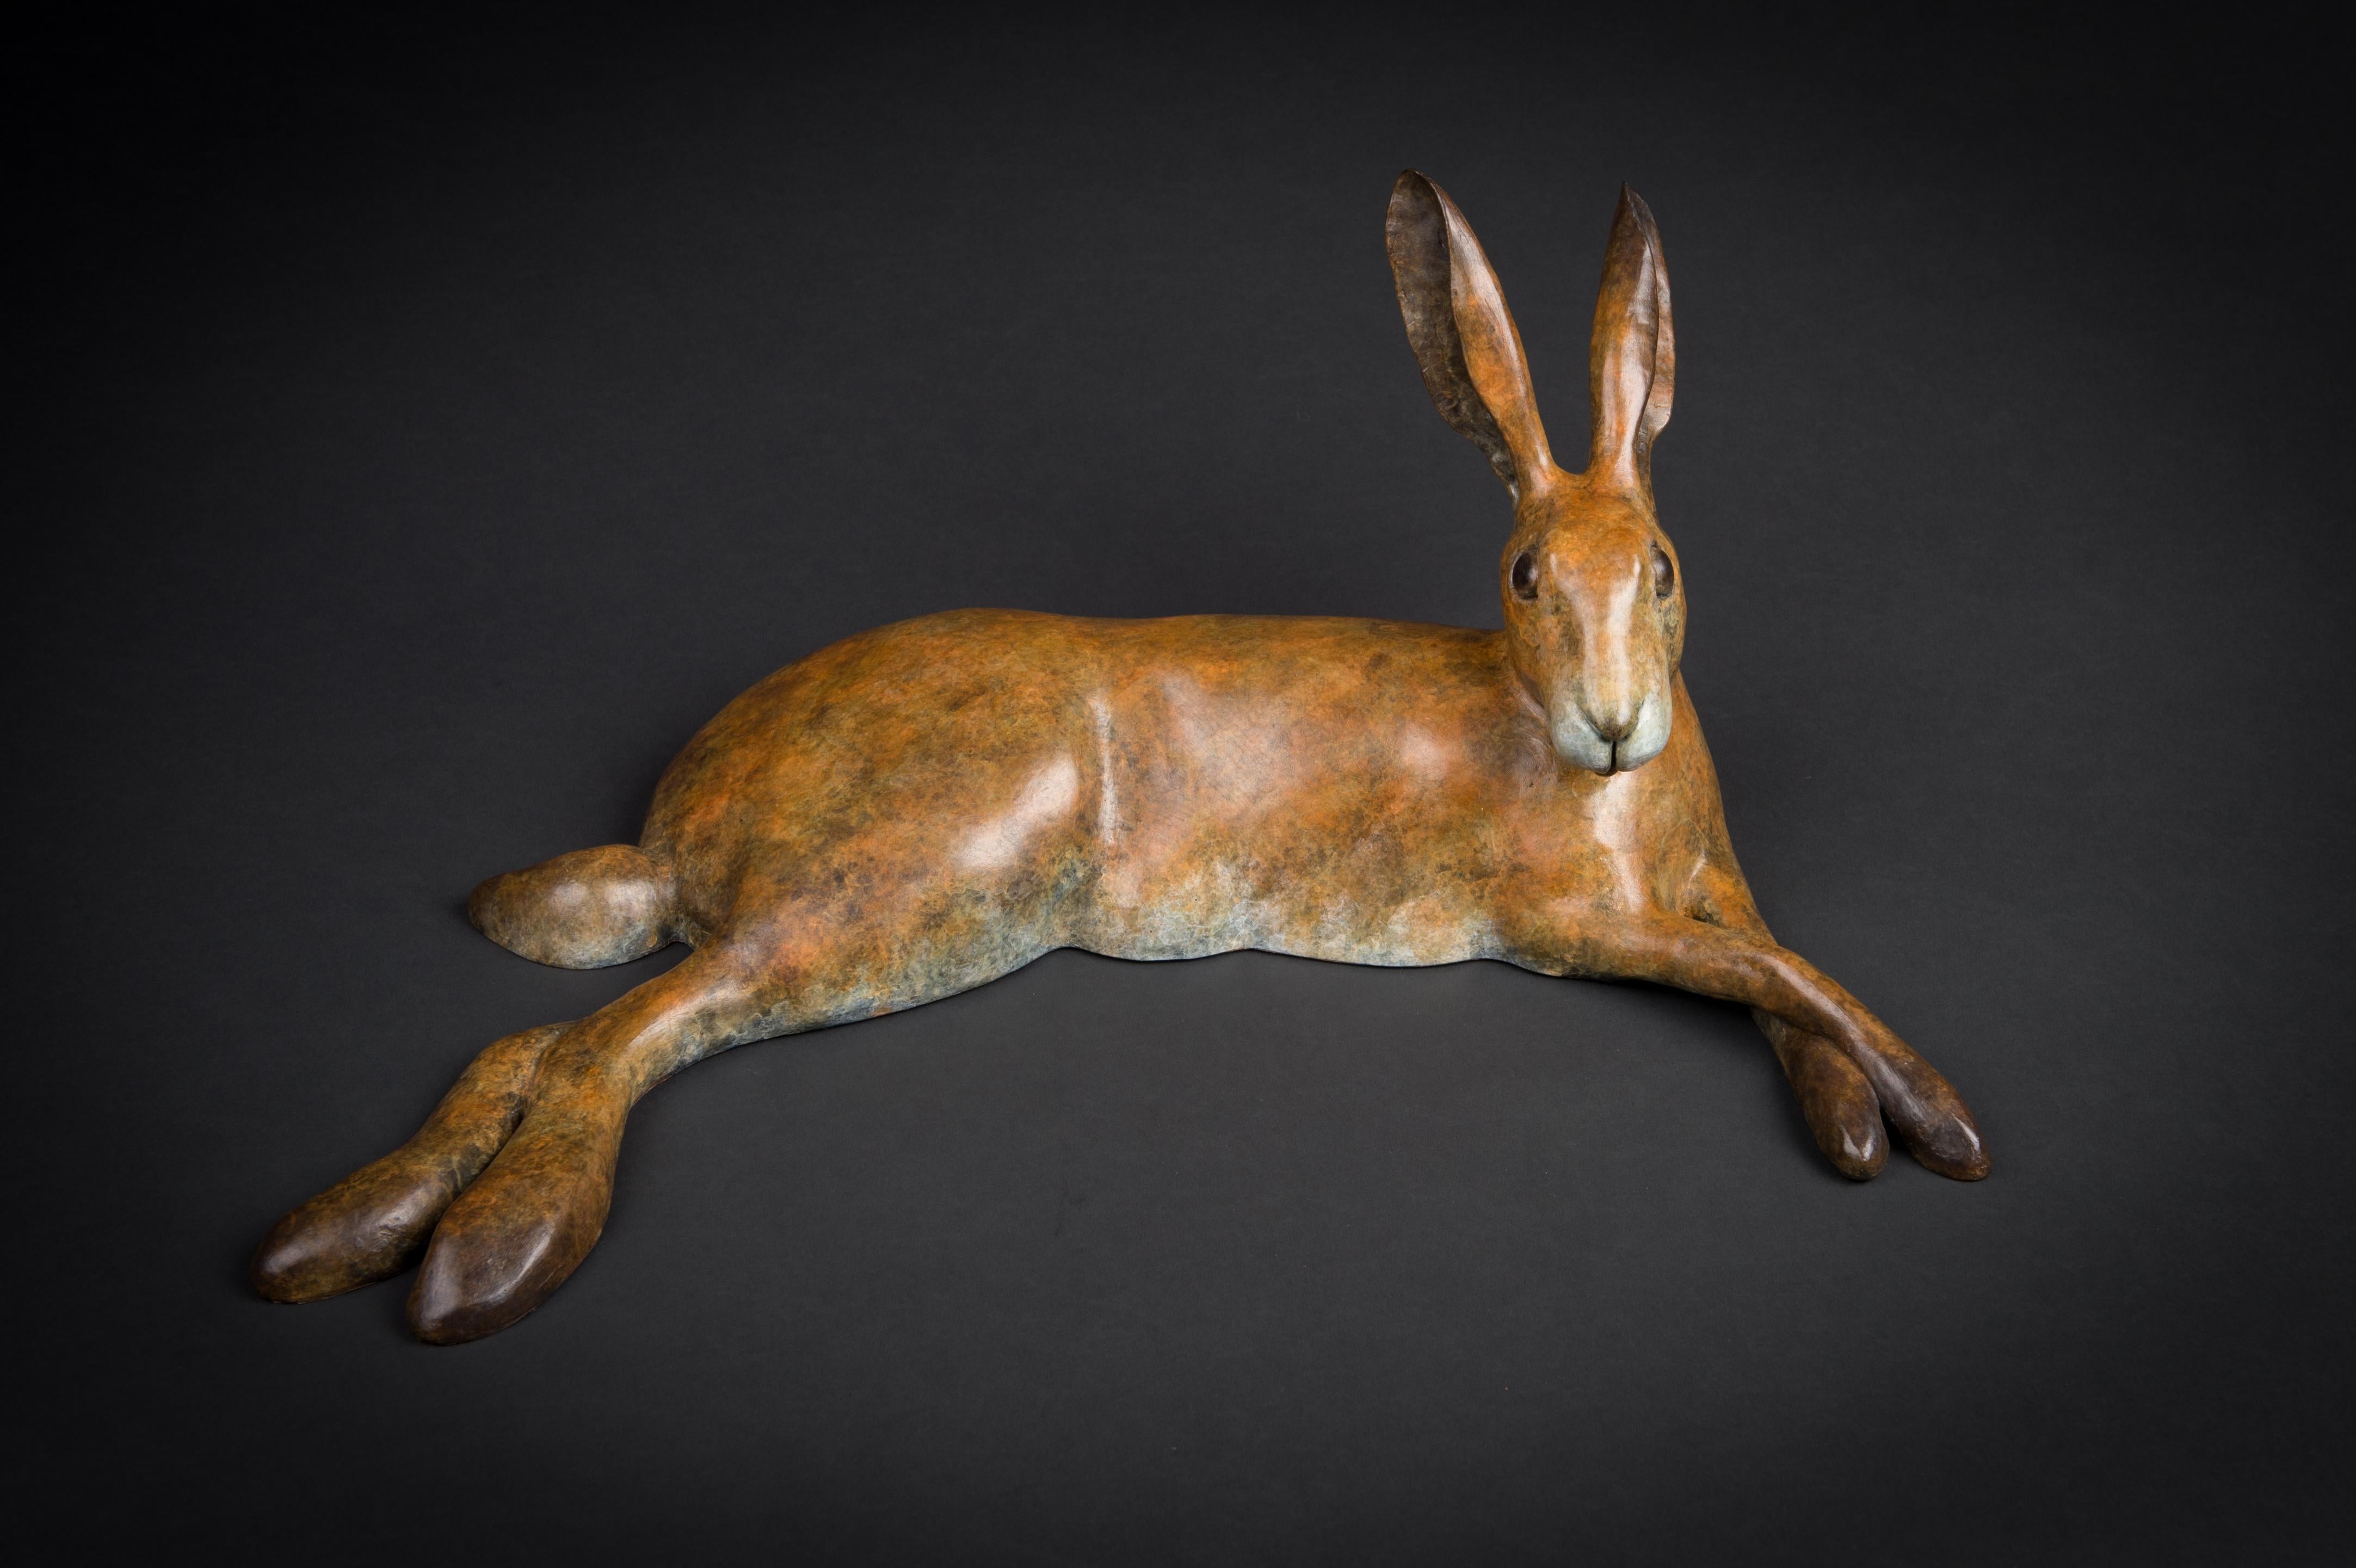 Richard Smith b.1955 Still-Life Sculpture - 'Lying Hare' Solid Bronze Wildlife Sculpture with Brown Patina. Limited Edition.